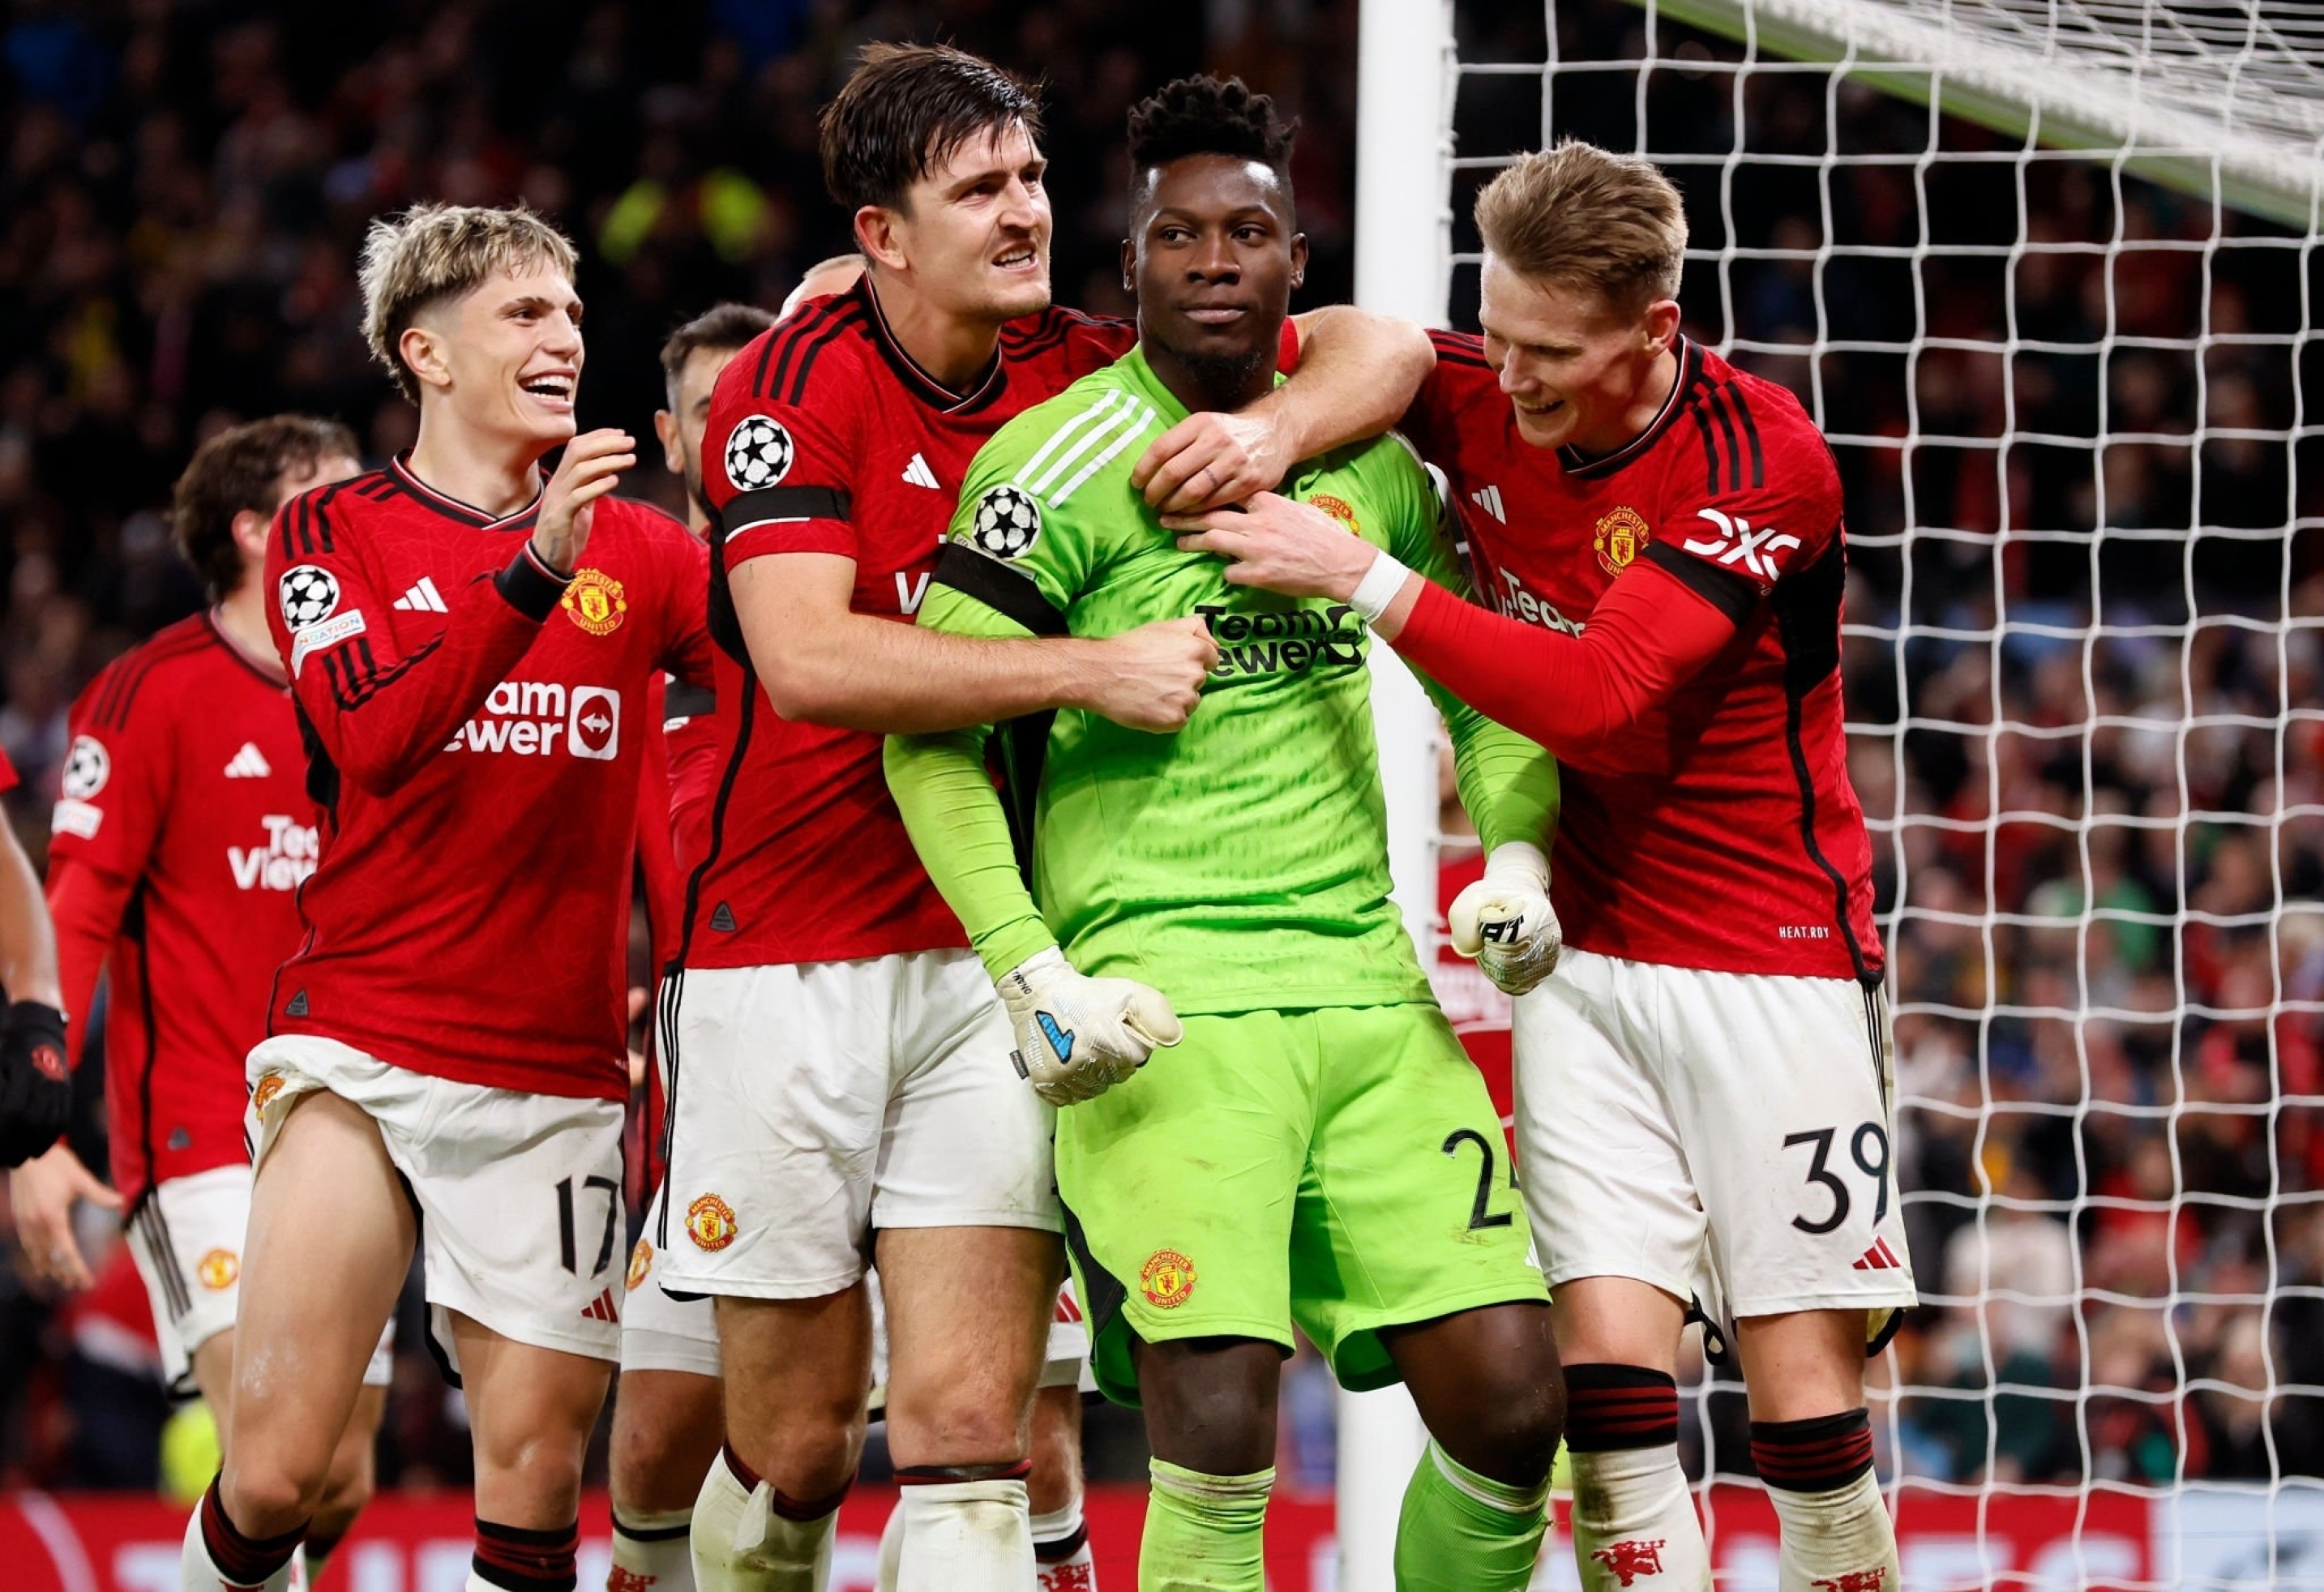 Man United vs Fulham - MUN vs FUL - Manchester United are ready to get back to the winning way in the Premier League against the Cottagers